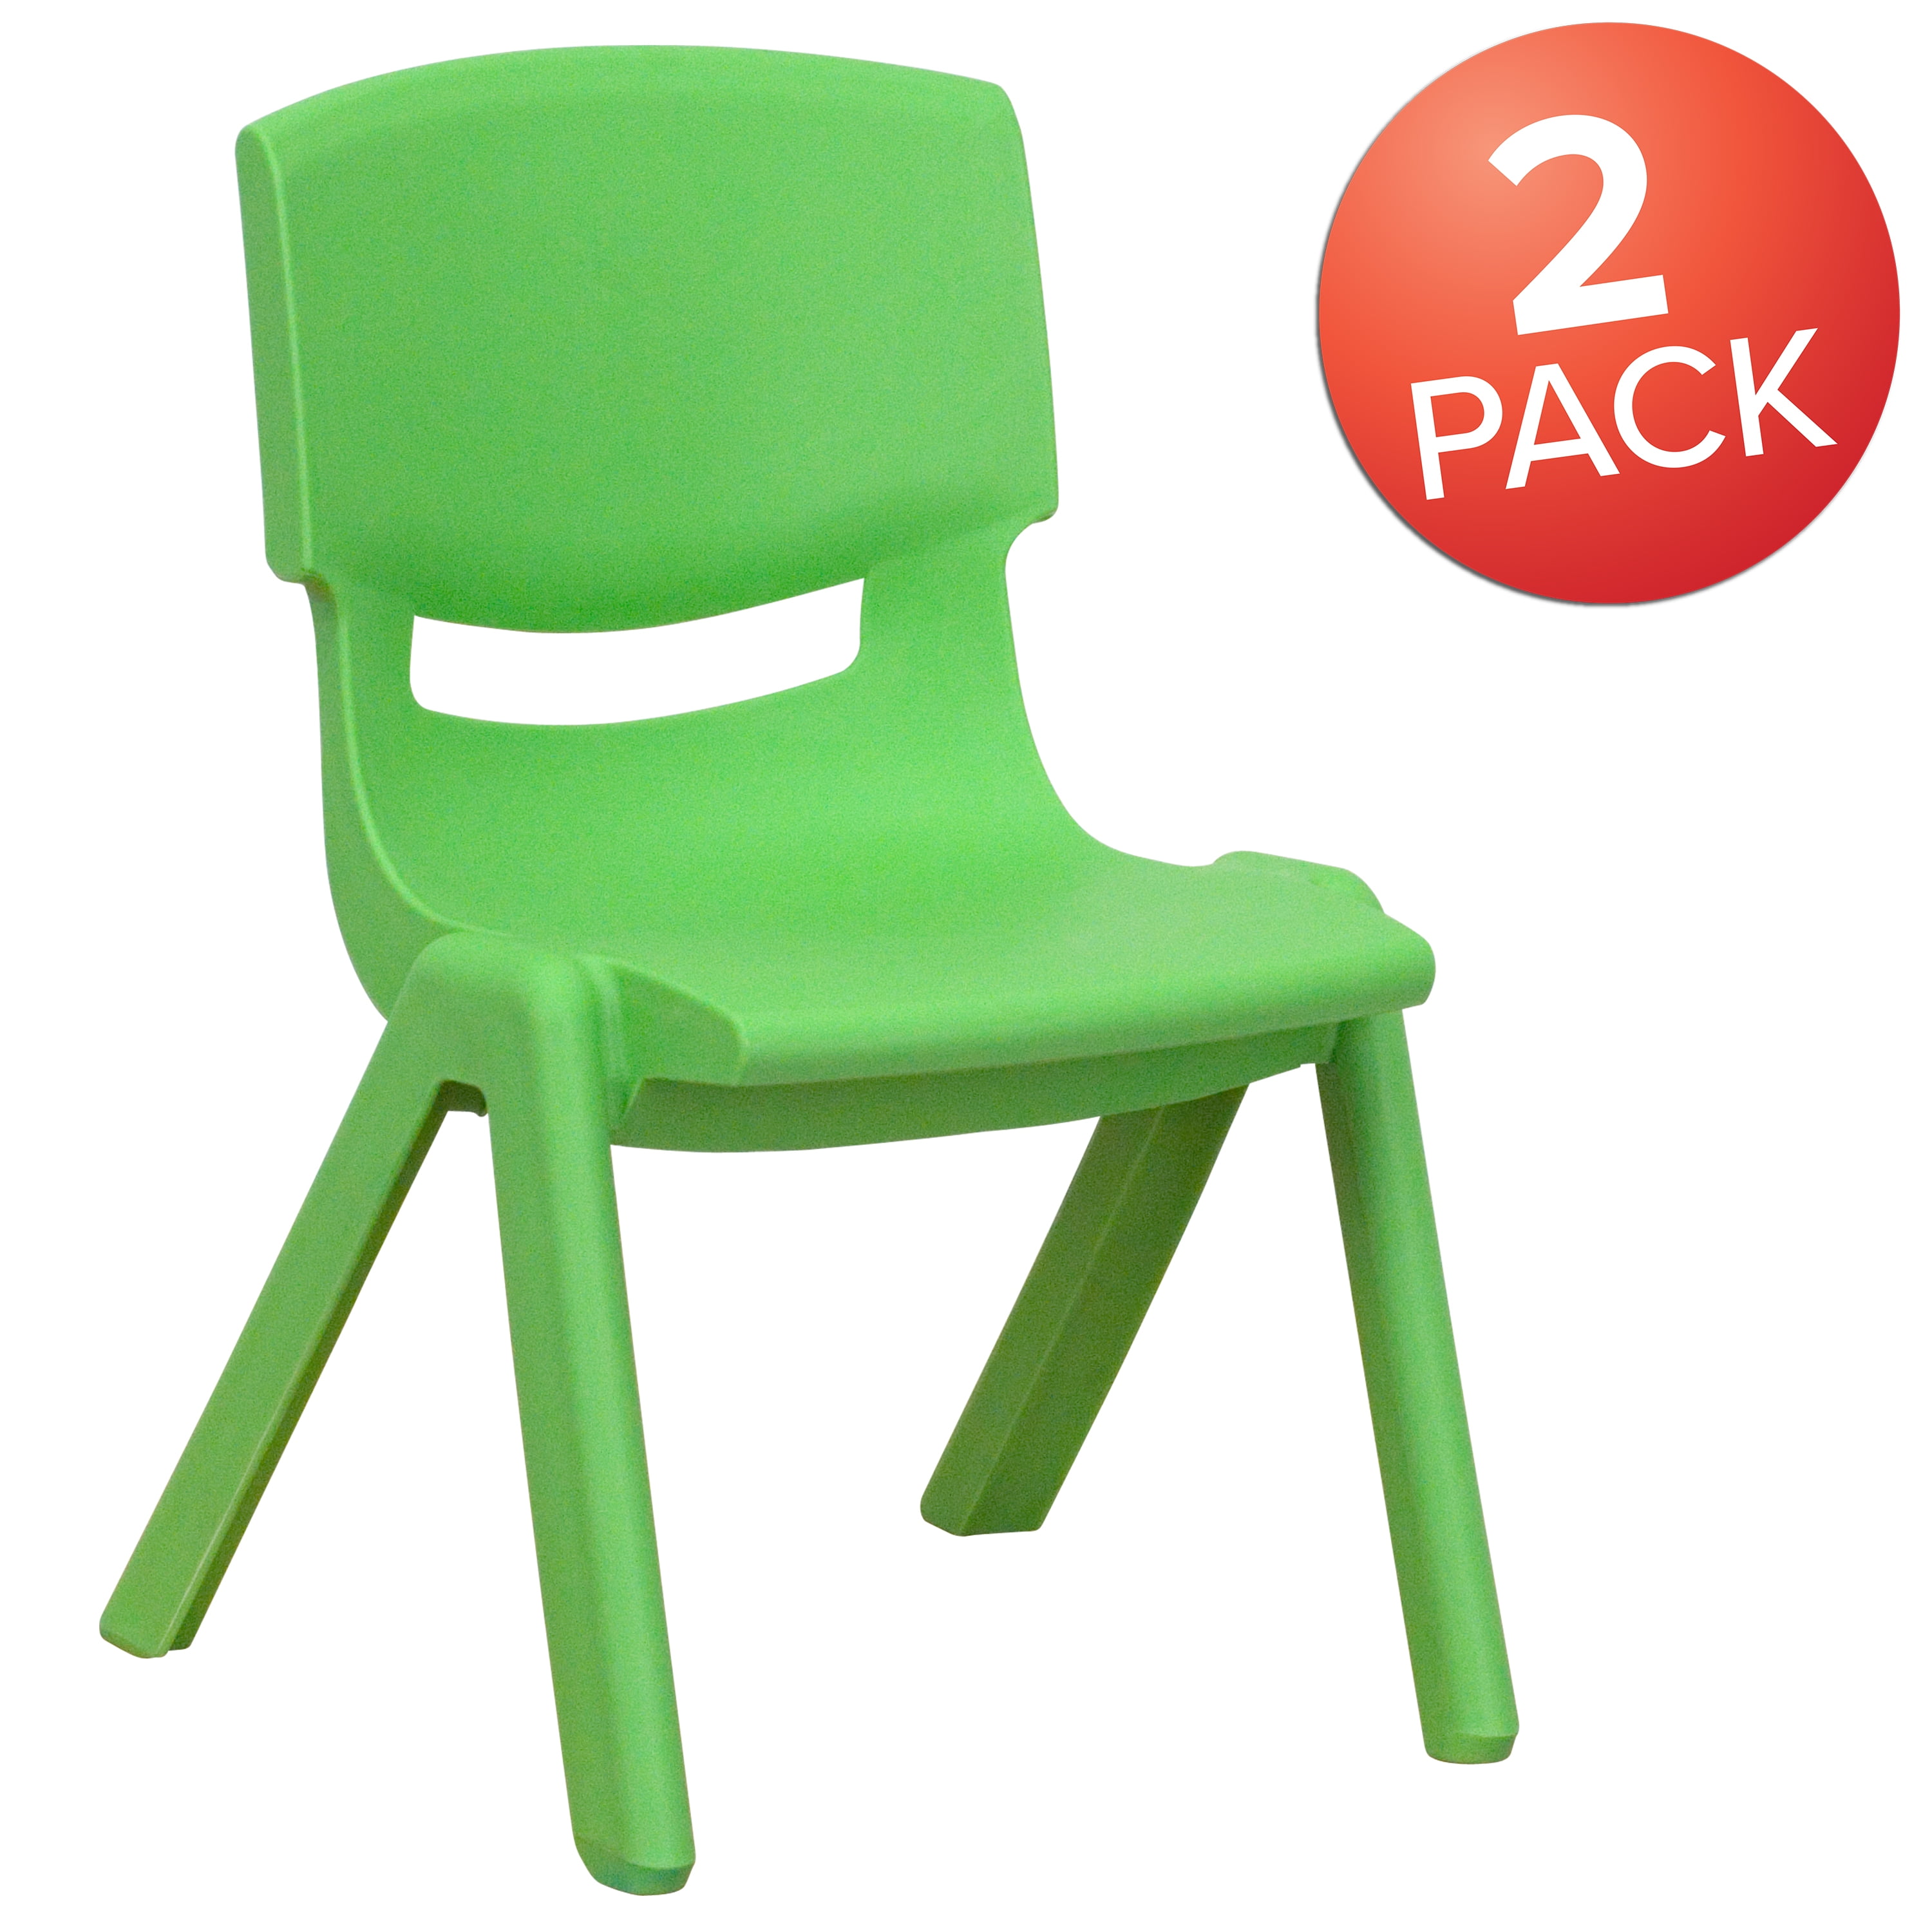 Flash Furniture Kids Plastic Stacking School Chair (2 Pack), Green - 3